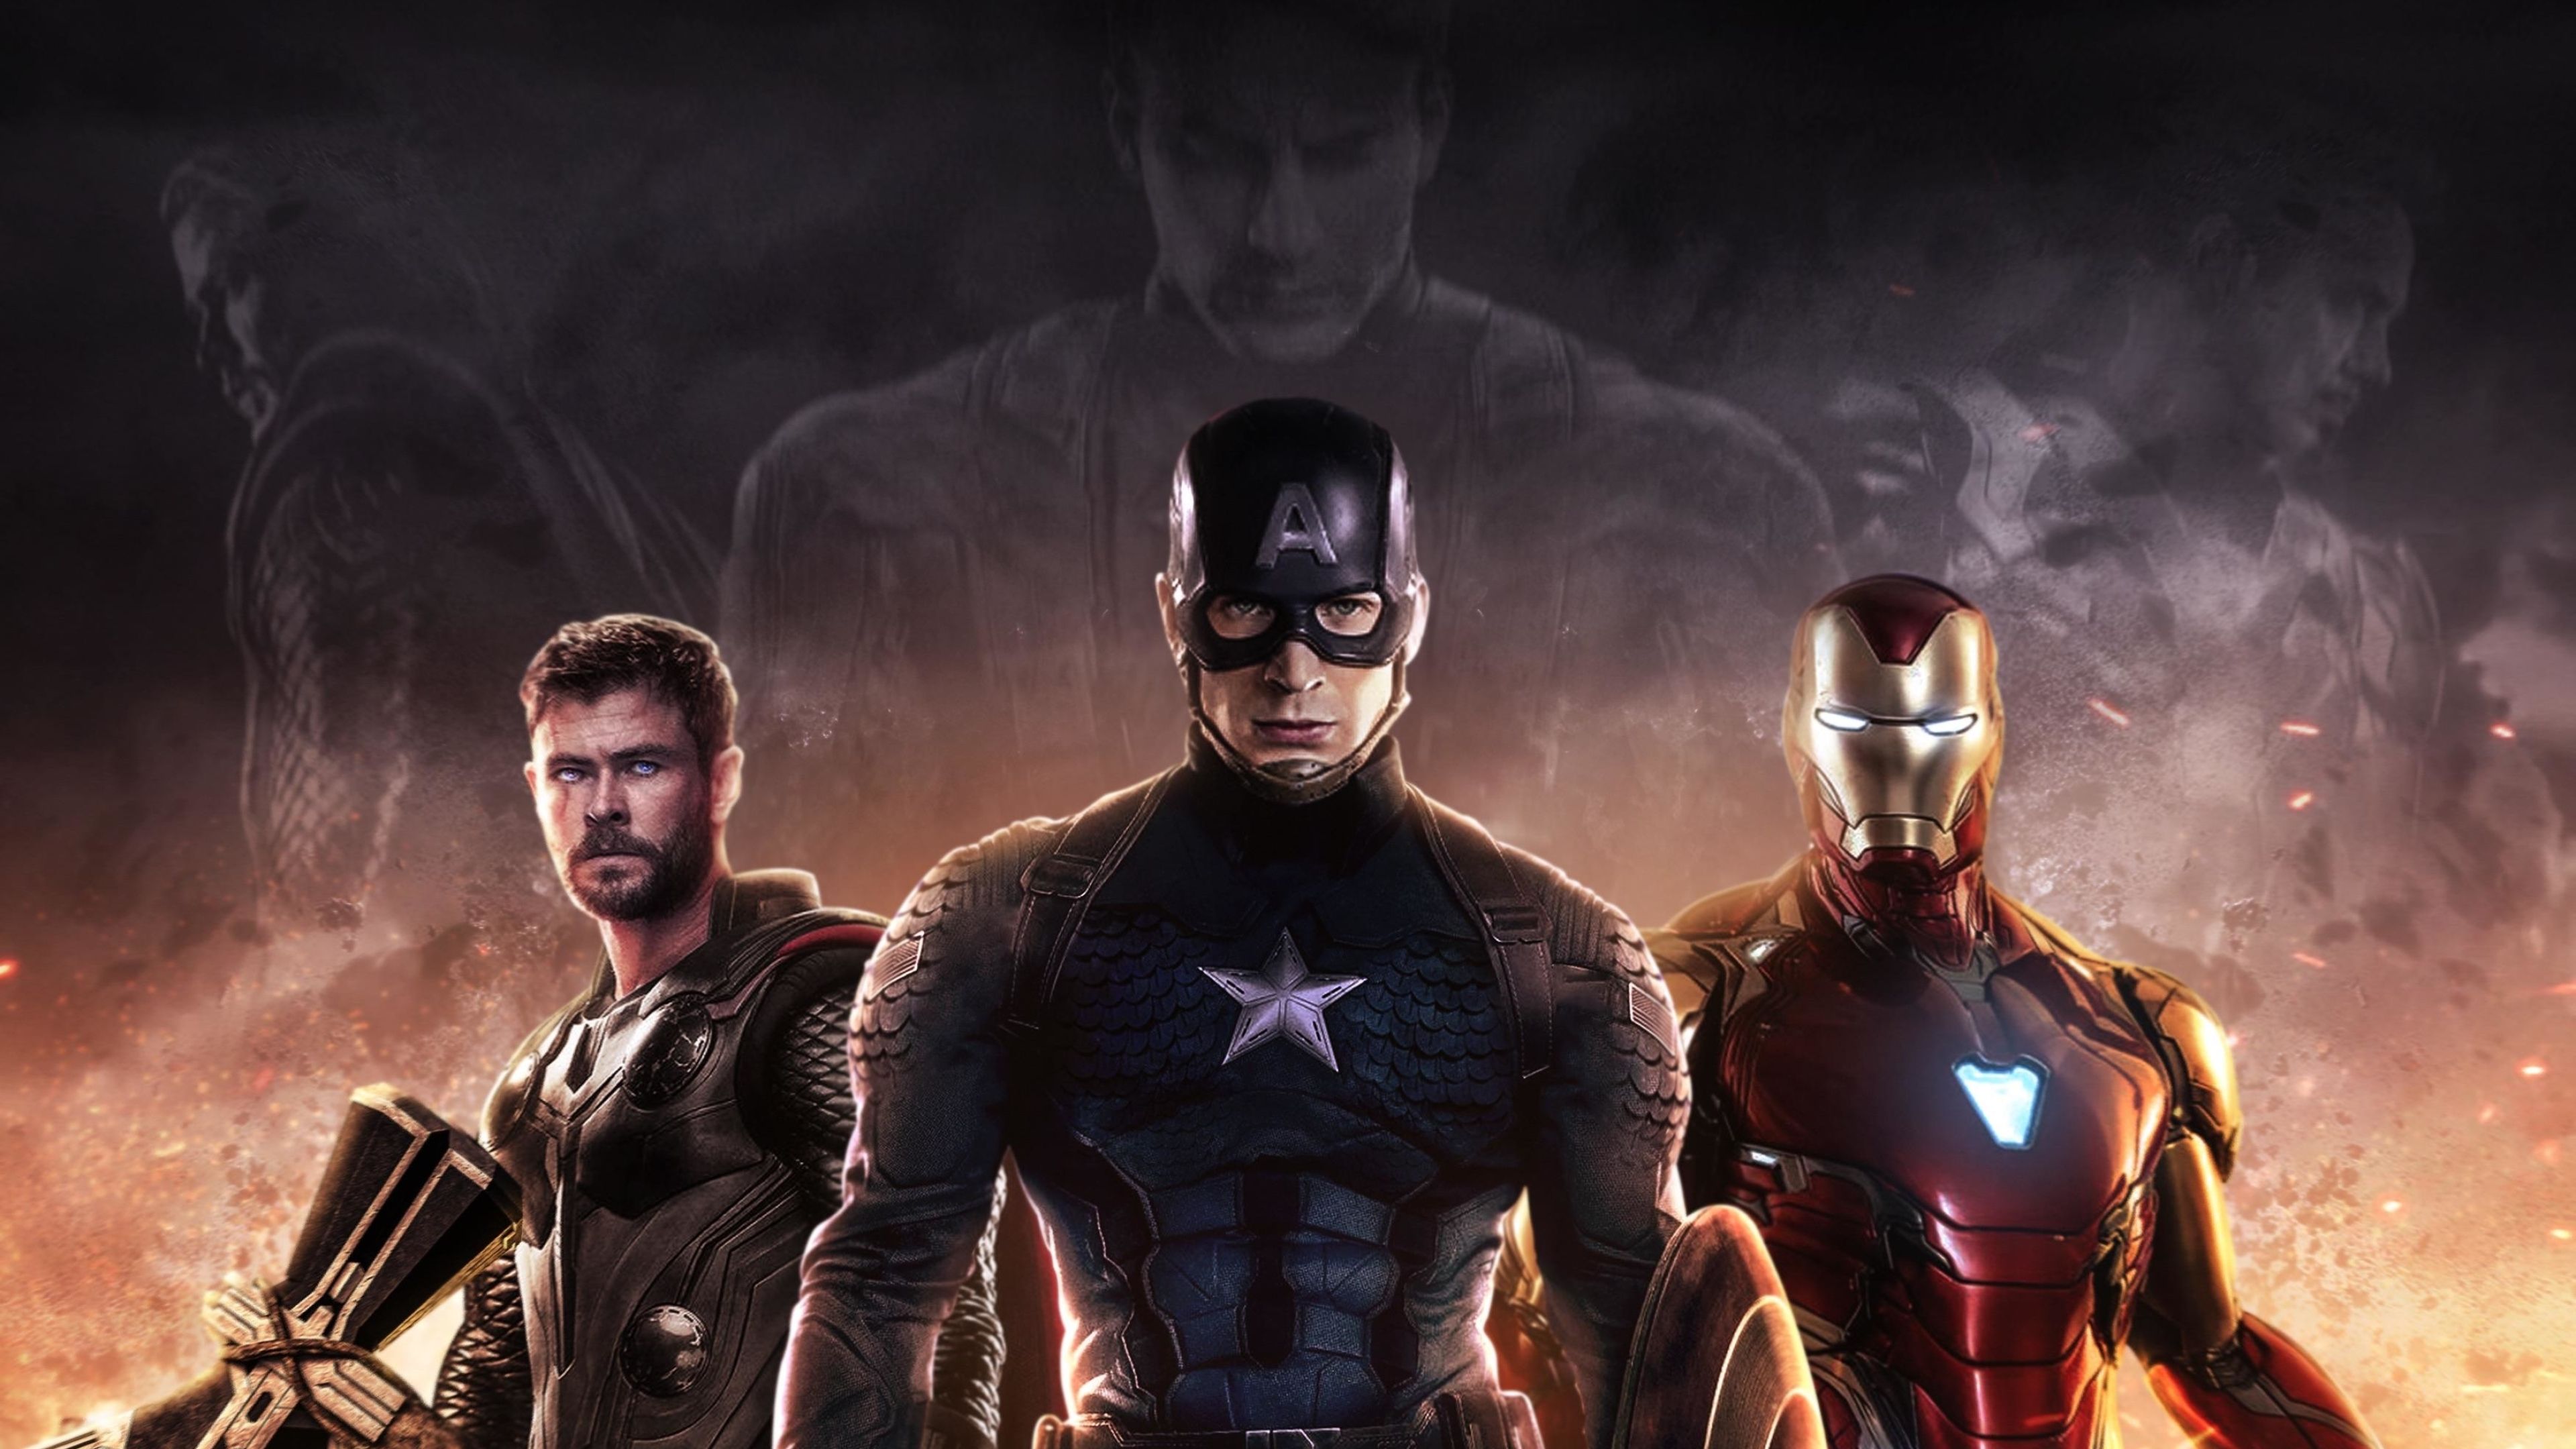 Tons of awesome Iron Man Captain America Thor wallpapers to download for fr...